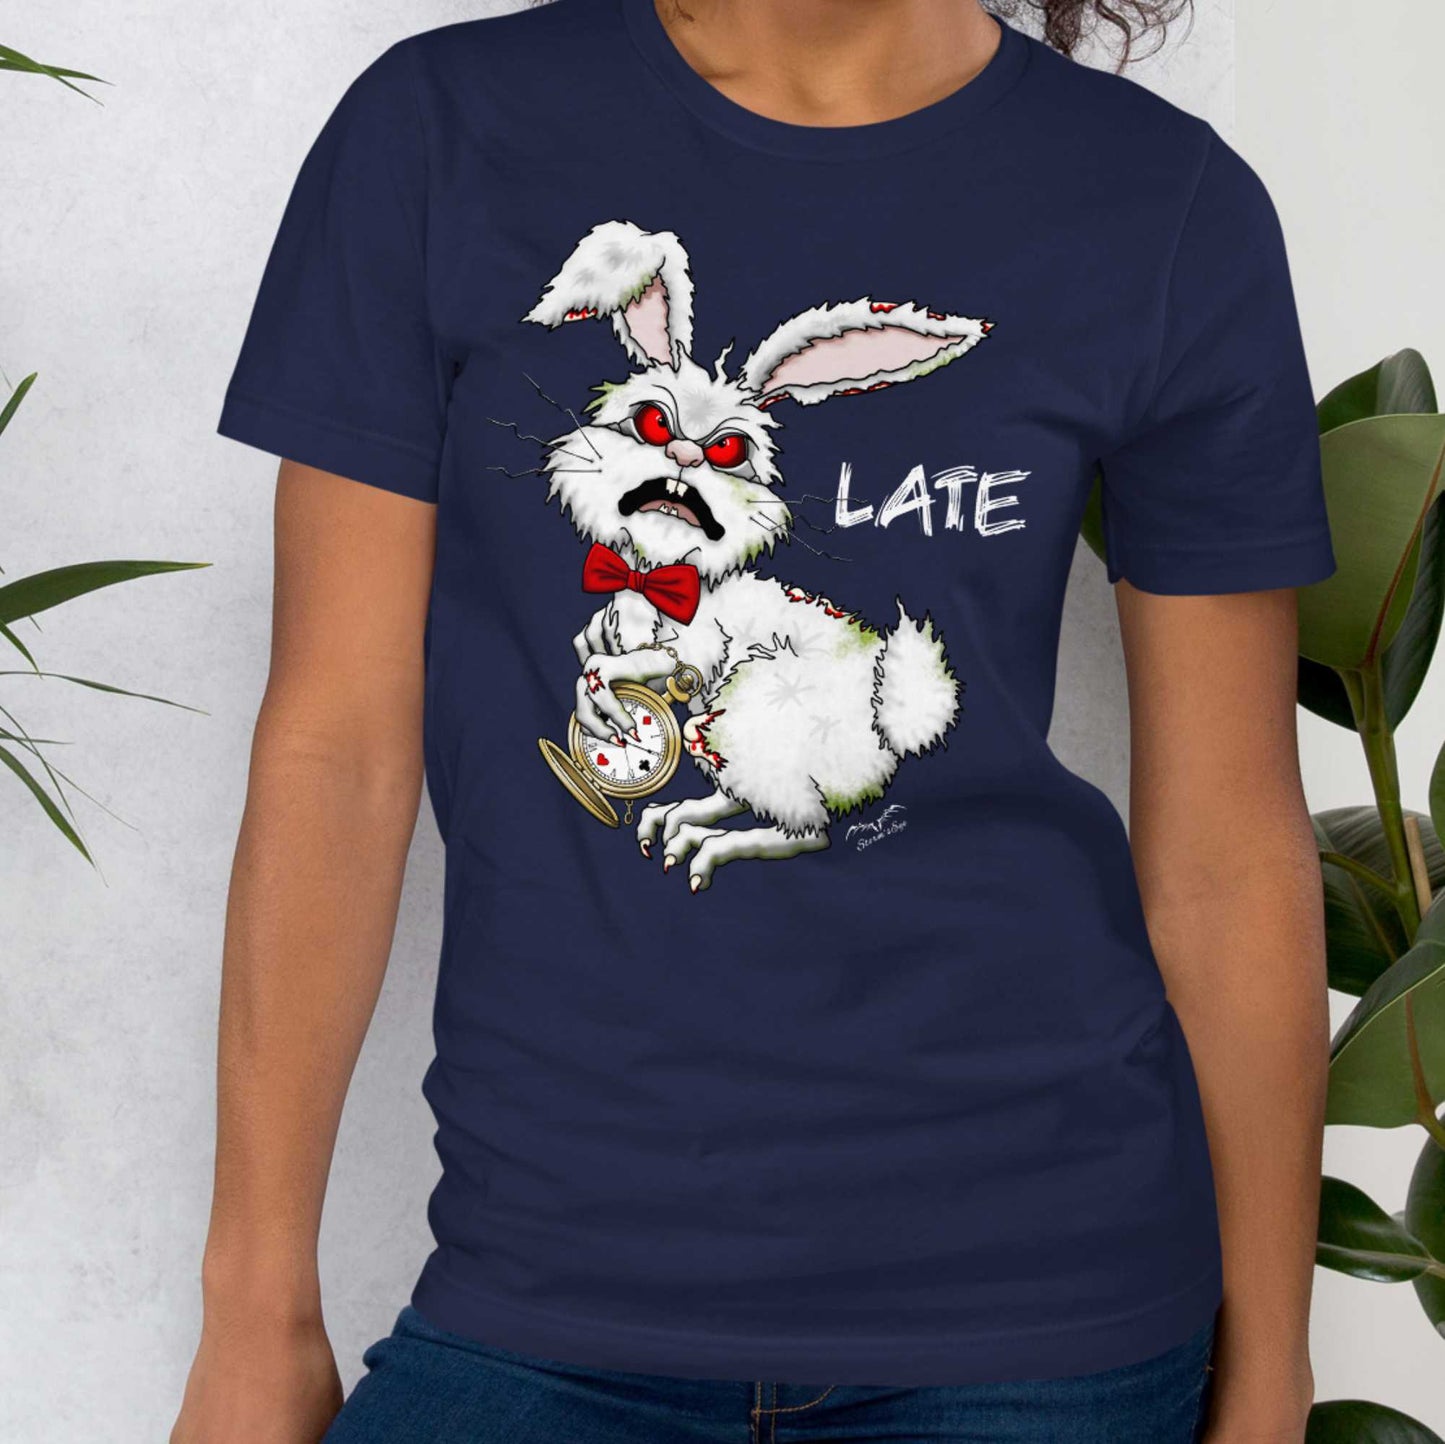 Stormseye Design zombie bunny t shirt, modelled view navy